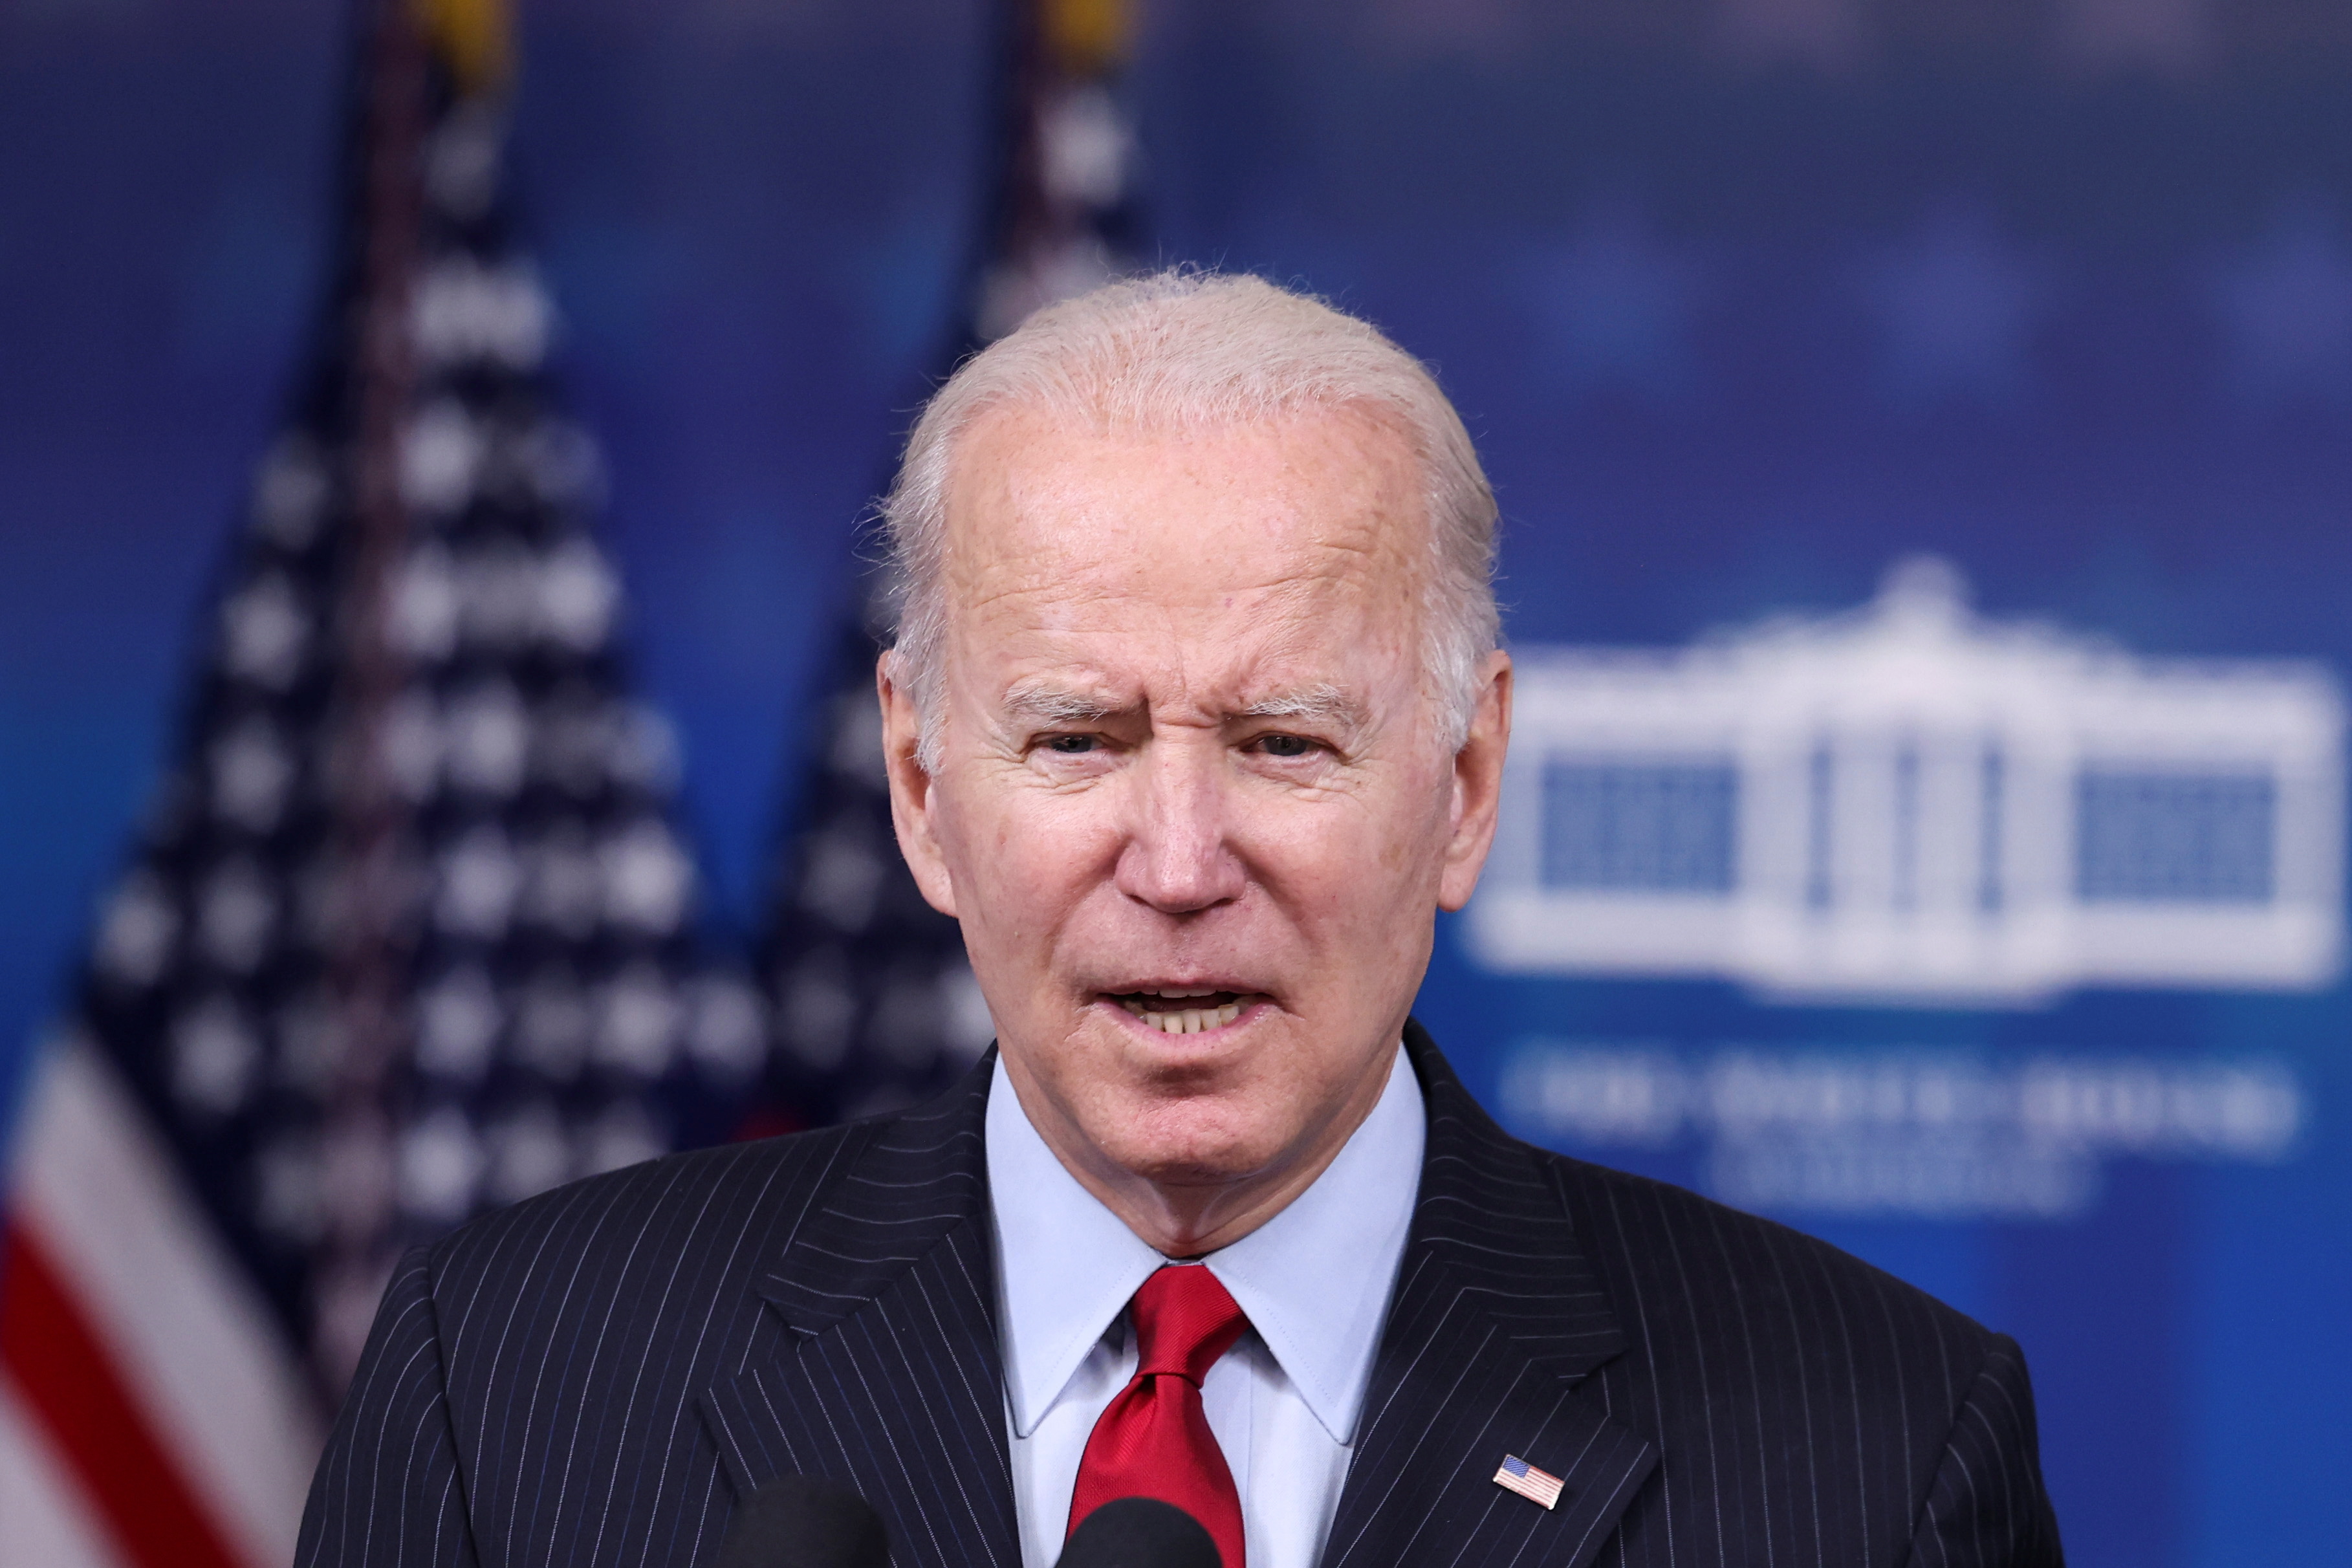 U.S. President Joe Biden announces the release of 50 million barrels of oil from the U.S. Strategic Petroleum Reserve as part of a coordinated effort with other major economies to help ease rising gas prices as he delivers remarks on the economy and 